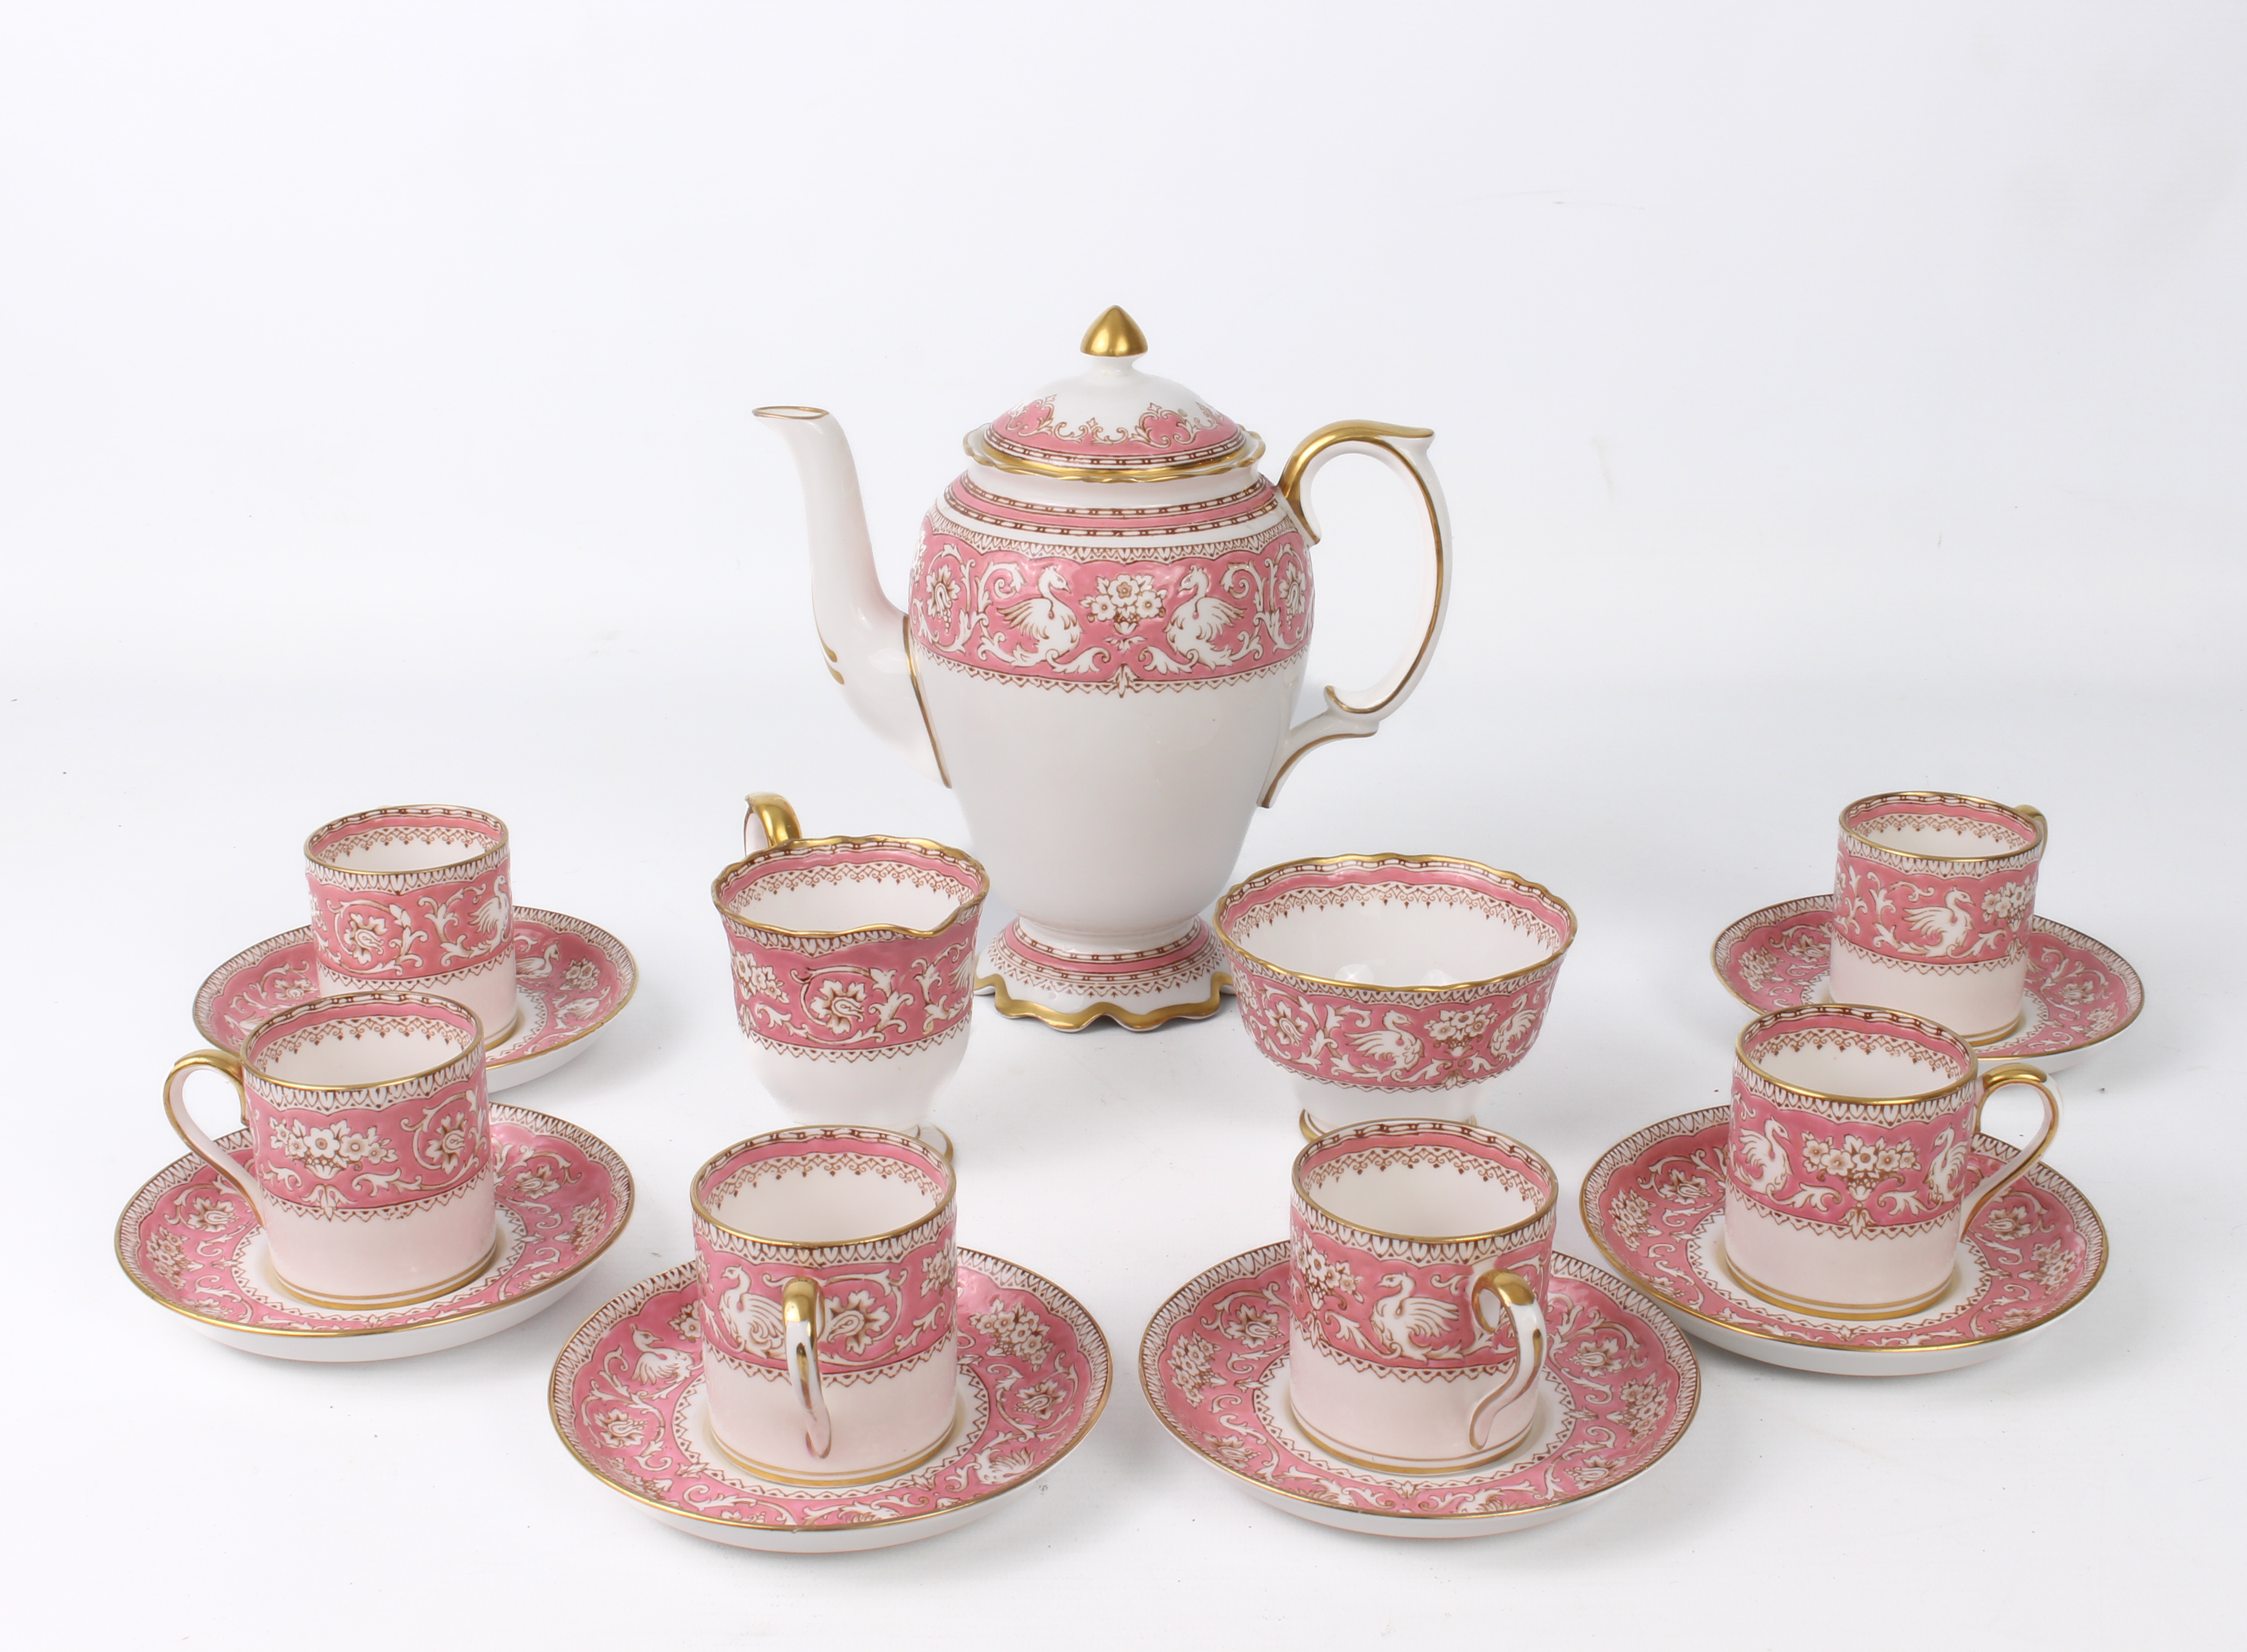 A Crown Staffordshire bone china coffee service - 1930s, 'Ellesmere' pattern, with decoration of